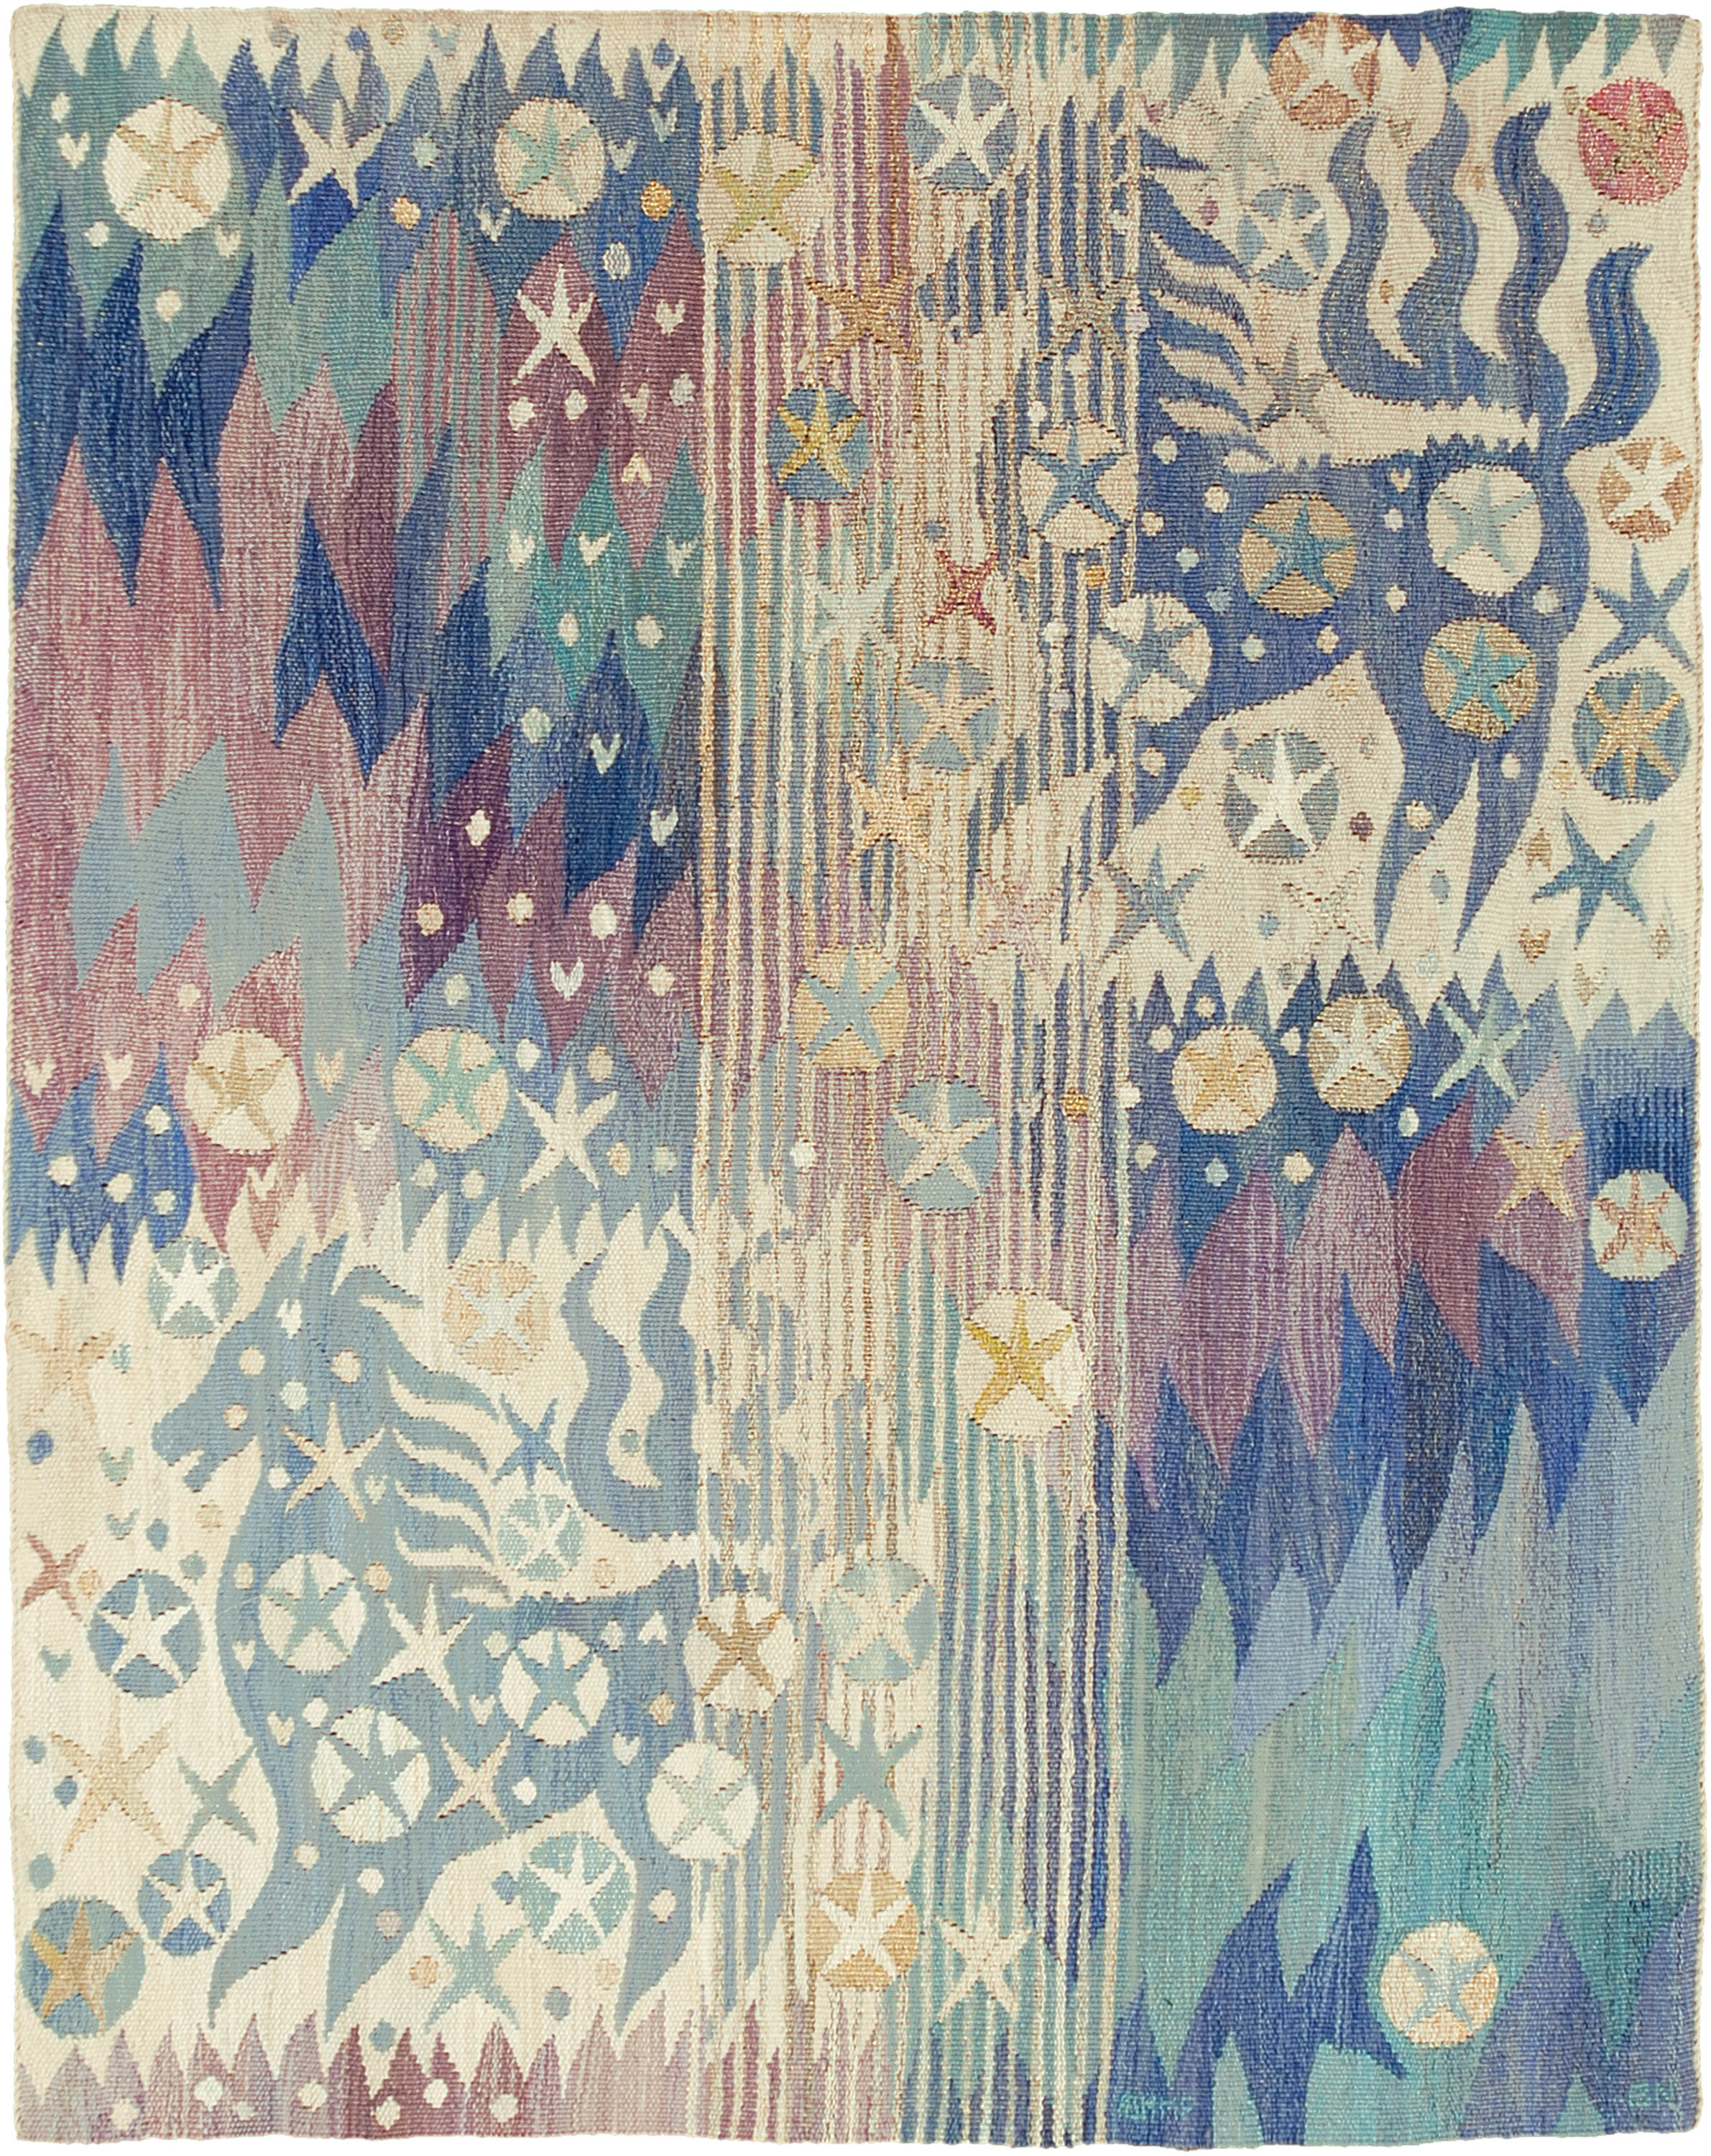 Swedish Vintage Wall Hanging by Barbro Nilsson | FJ Hakimian | Carpet Gallery in NYC